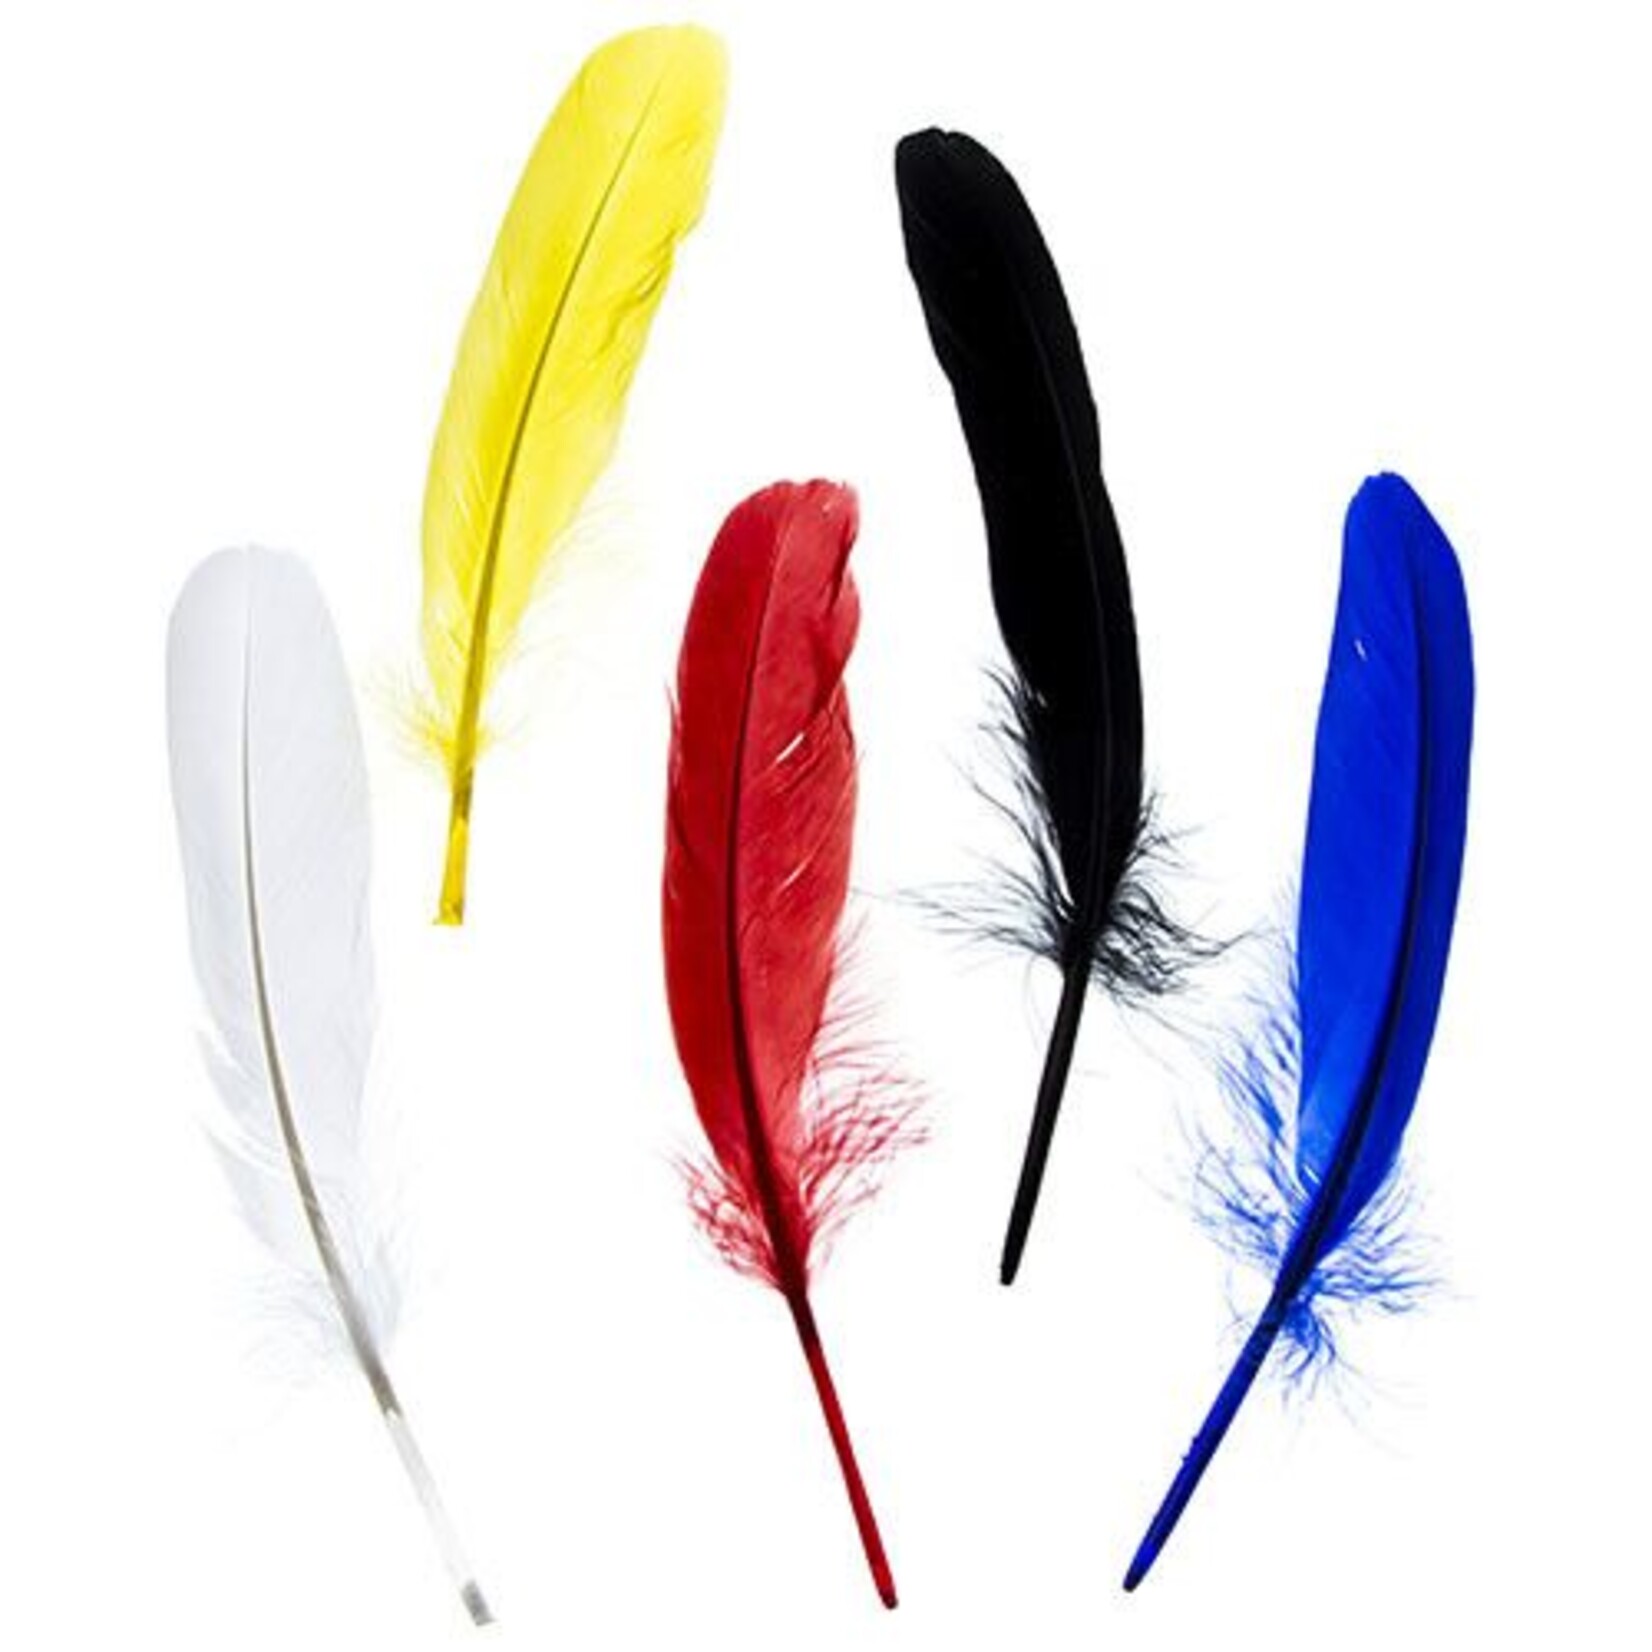 Goose Feathers 5-6 Inches Assorted Colours (10 Pieces)